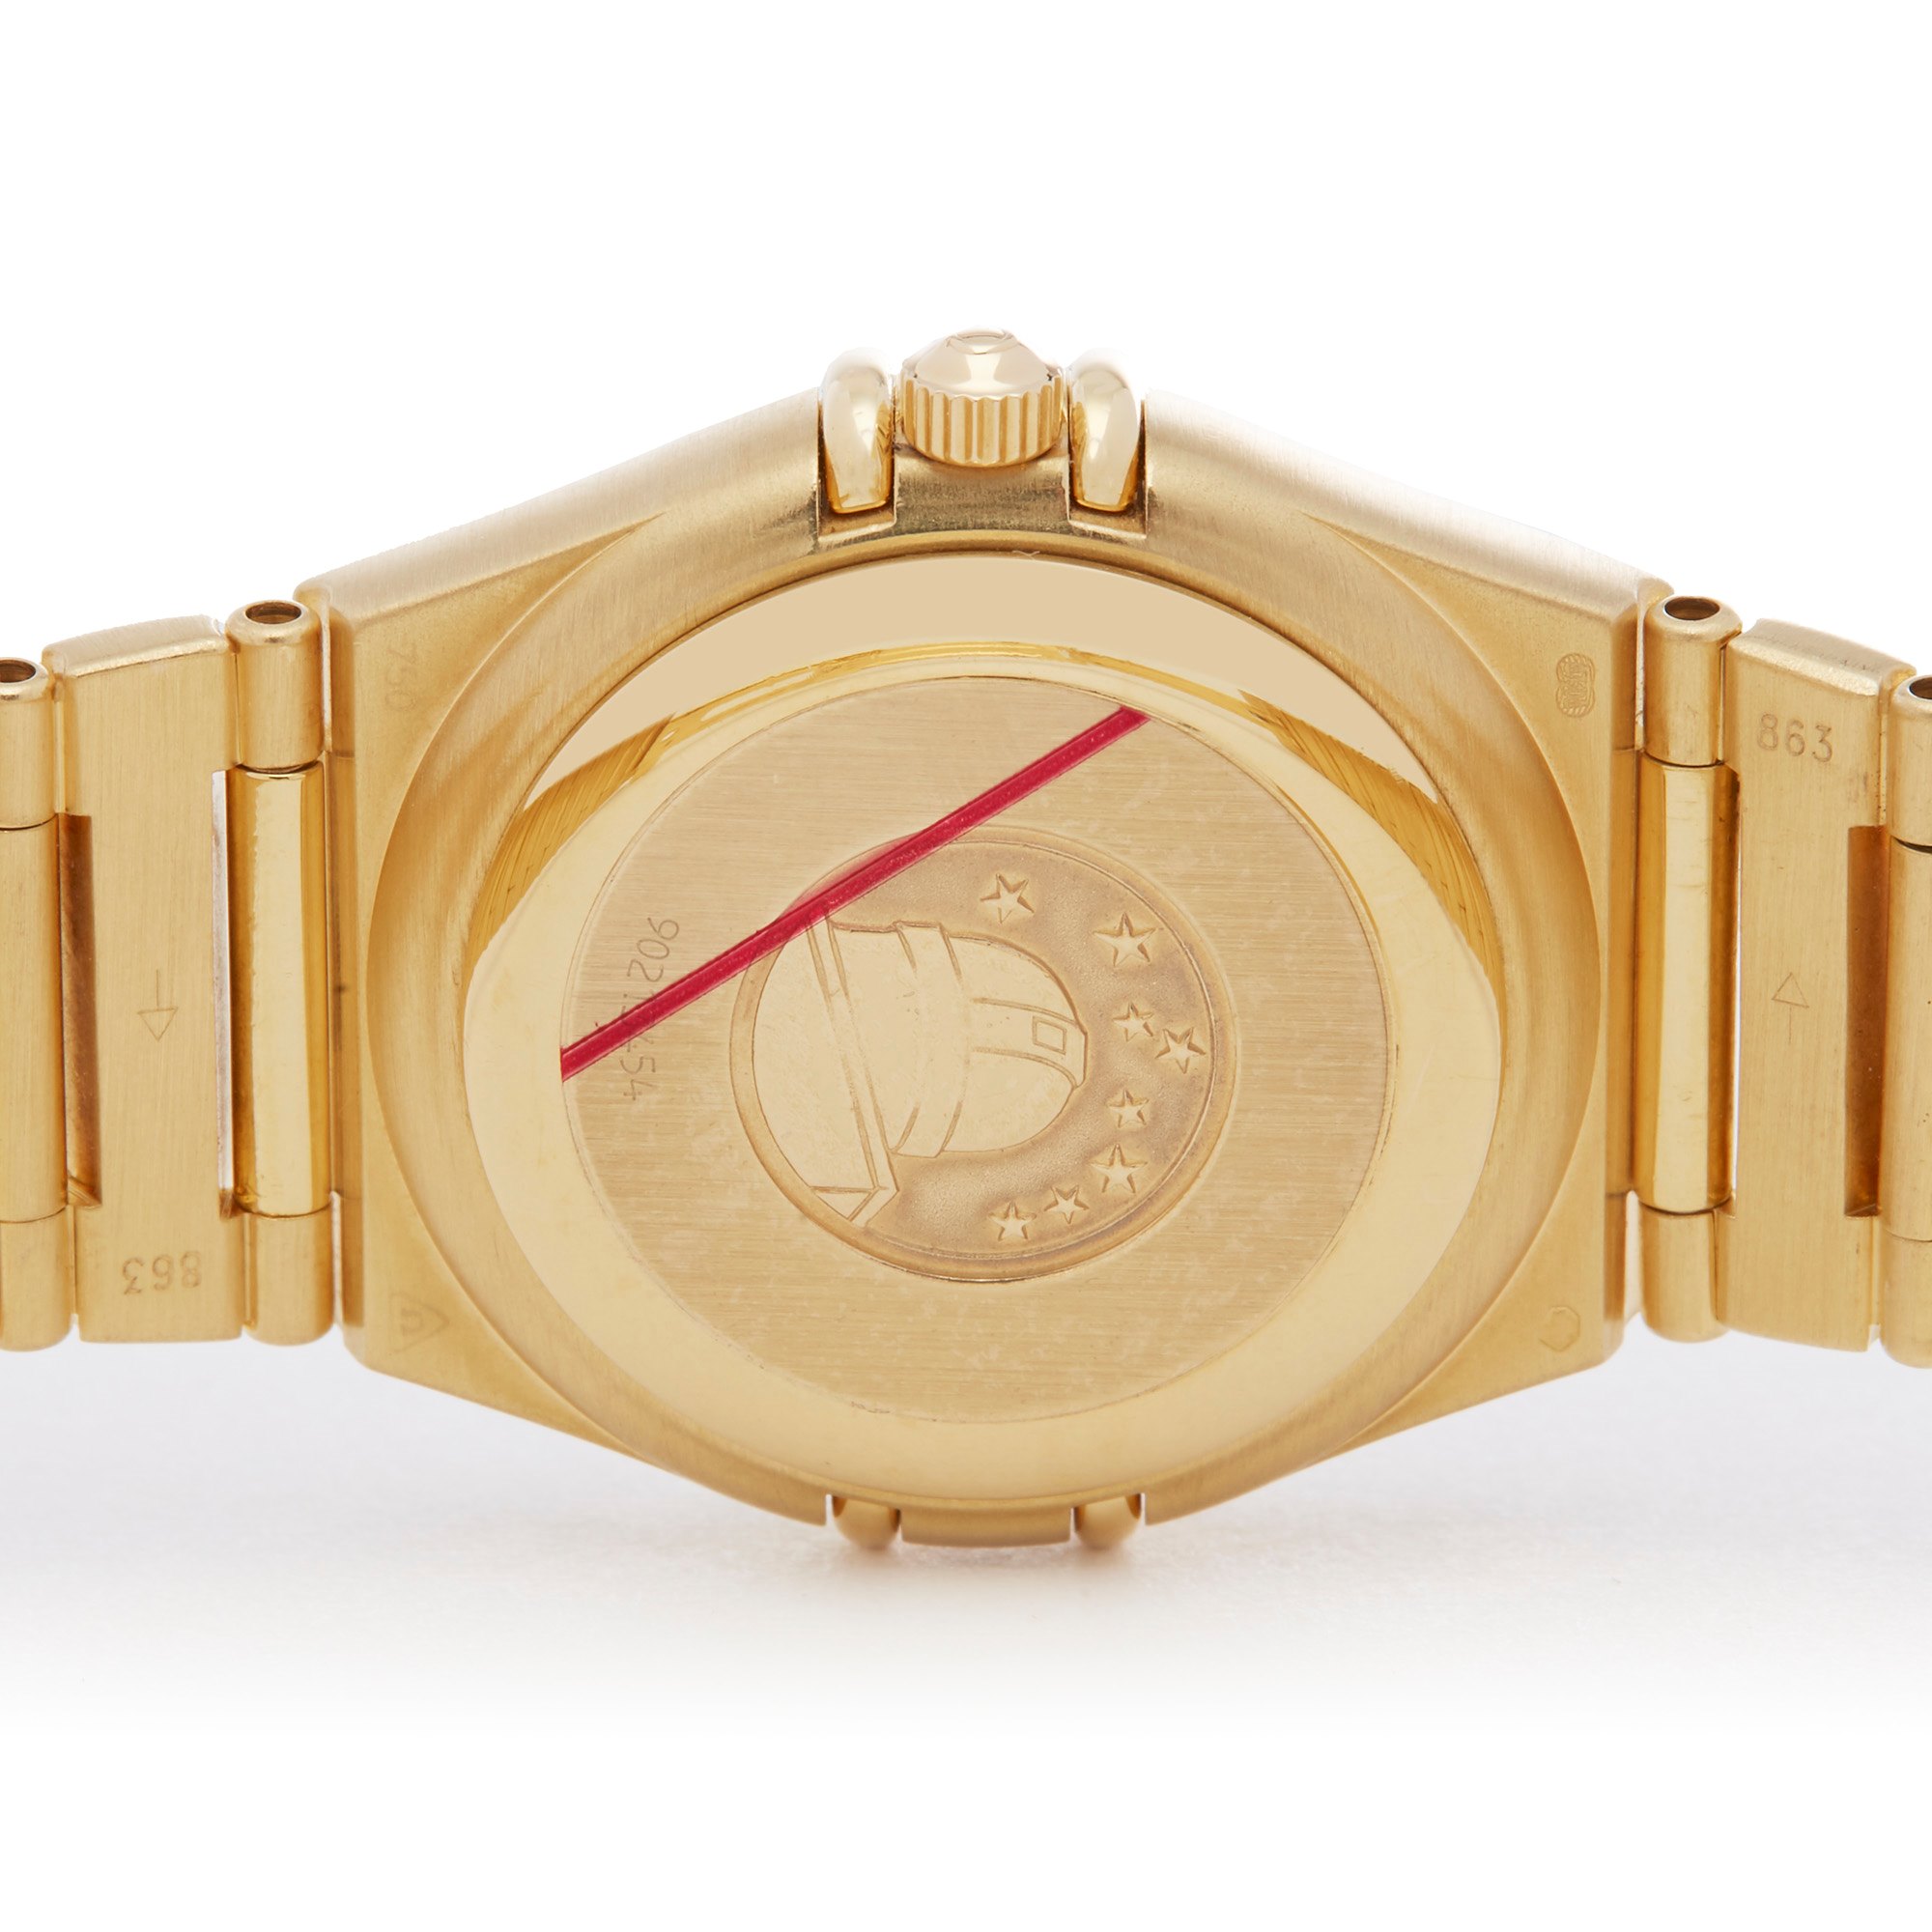 Omega Constellation 1197.79.00 Ladies Yellow Gold Iris Mid Size Automatic Watch - Image 6 of 7